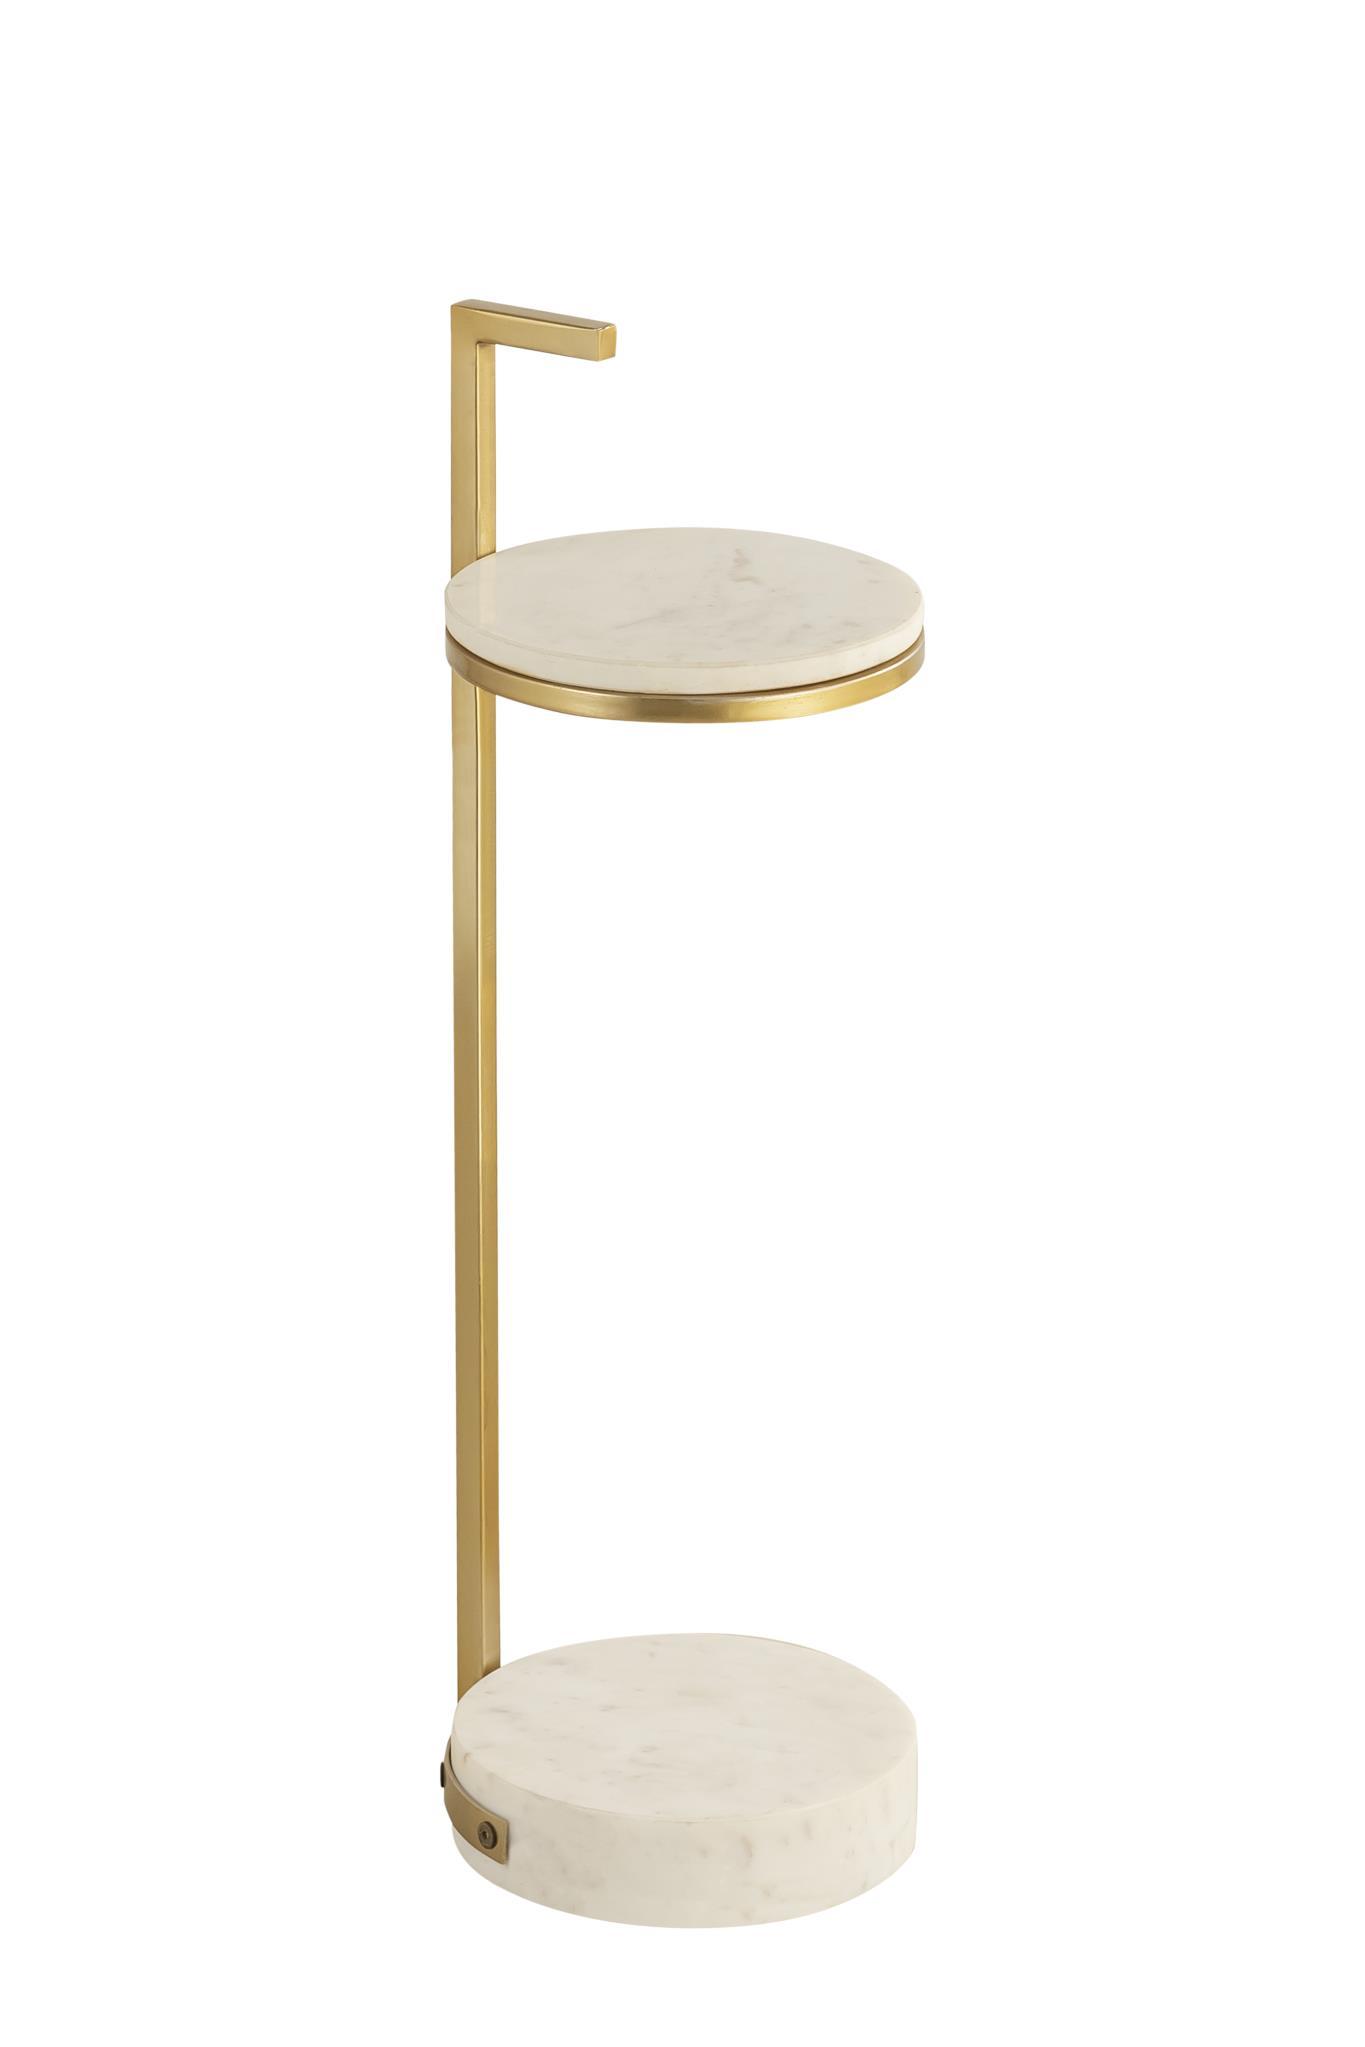 

    
Albany Living 4155 Drink Table 718852653137 Cocktail Table Marble/White/Gold 718852653137
